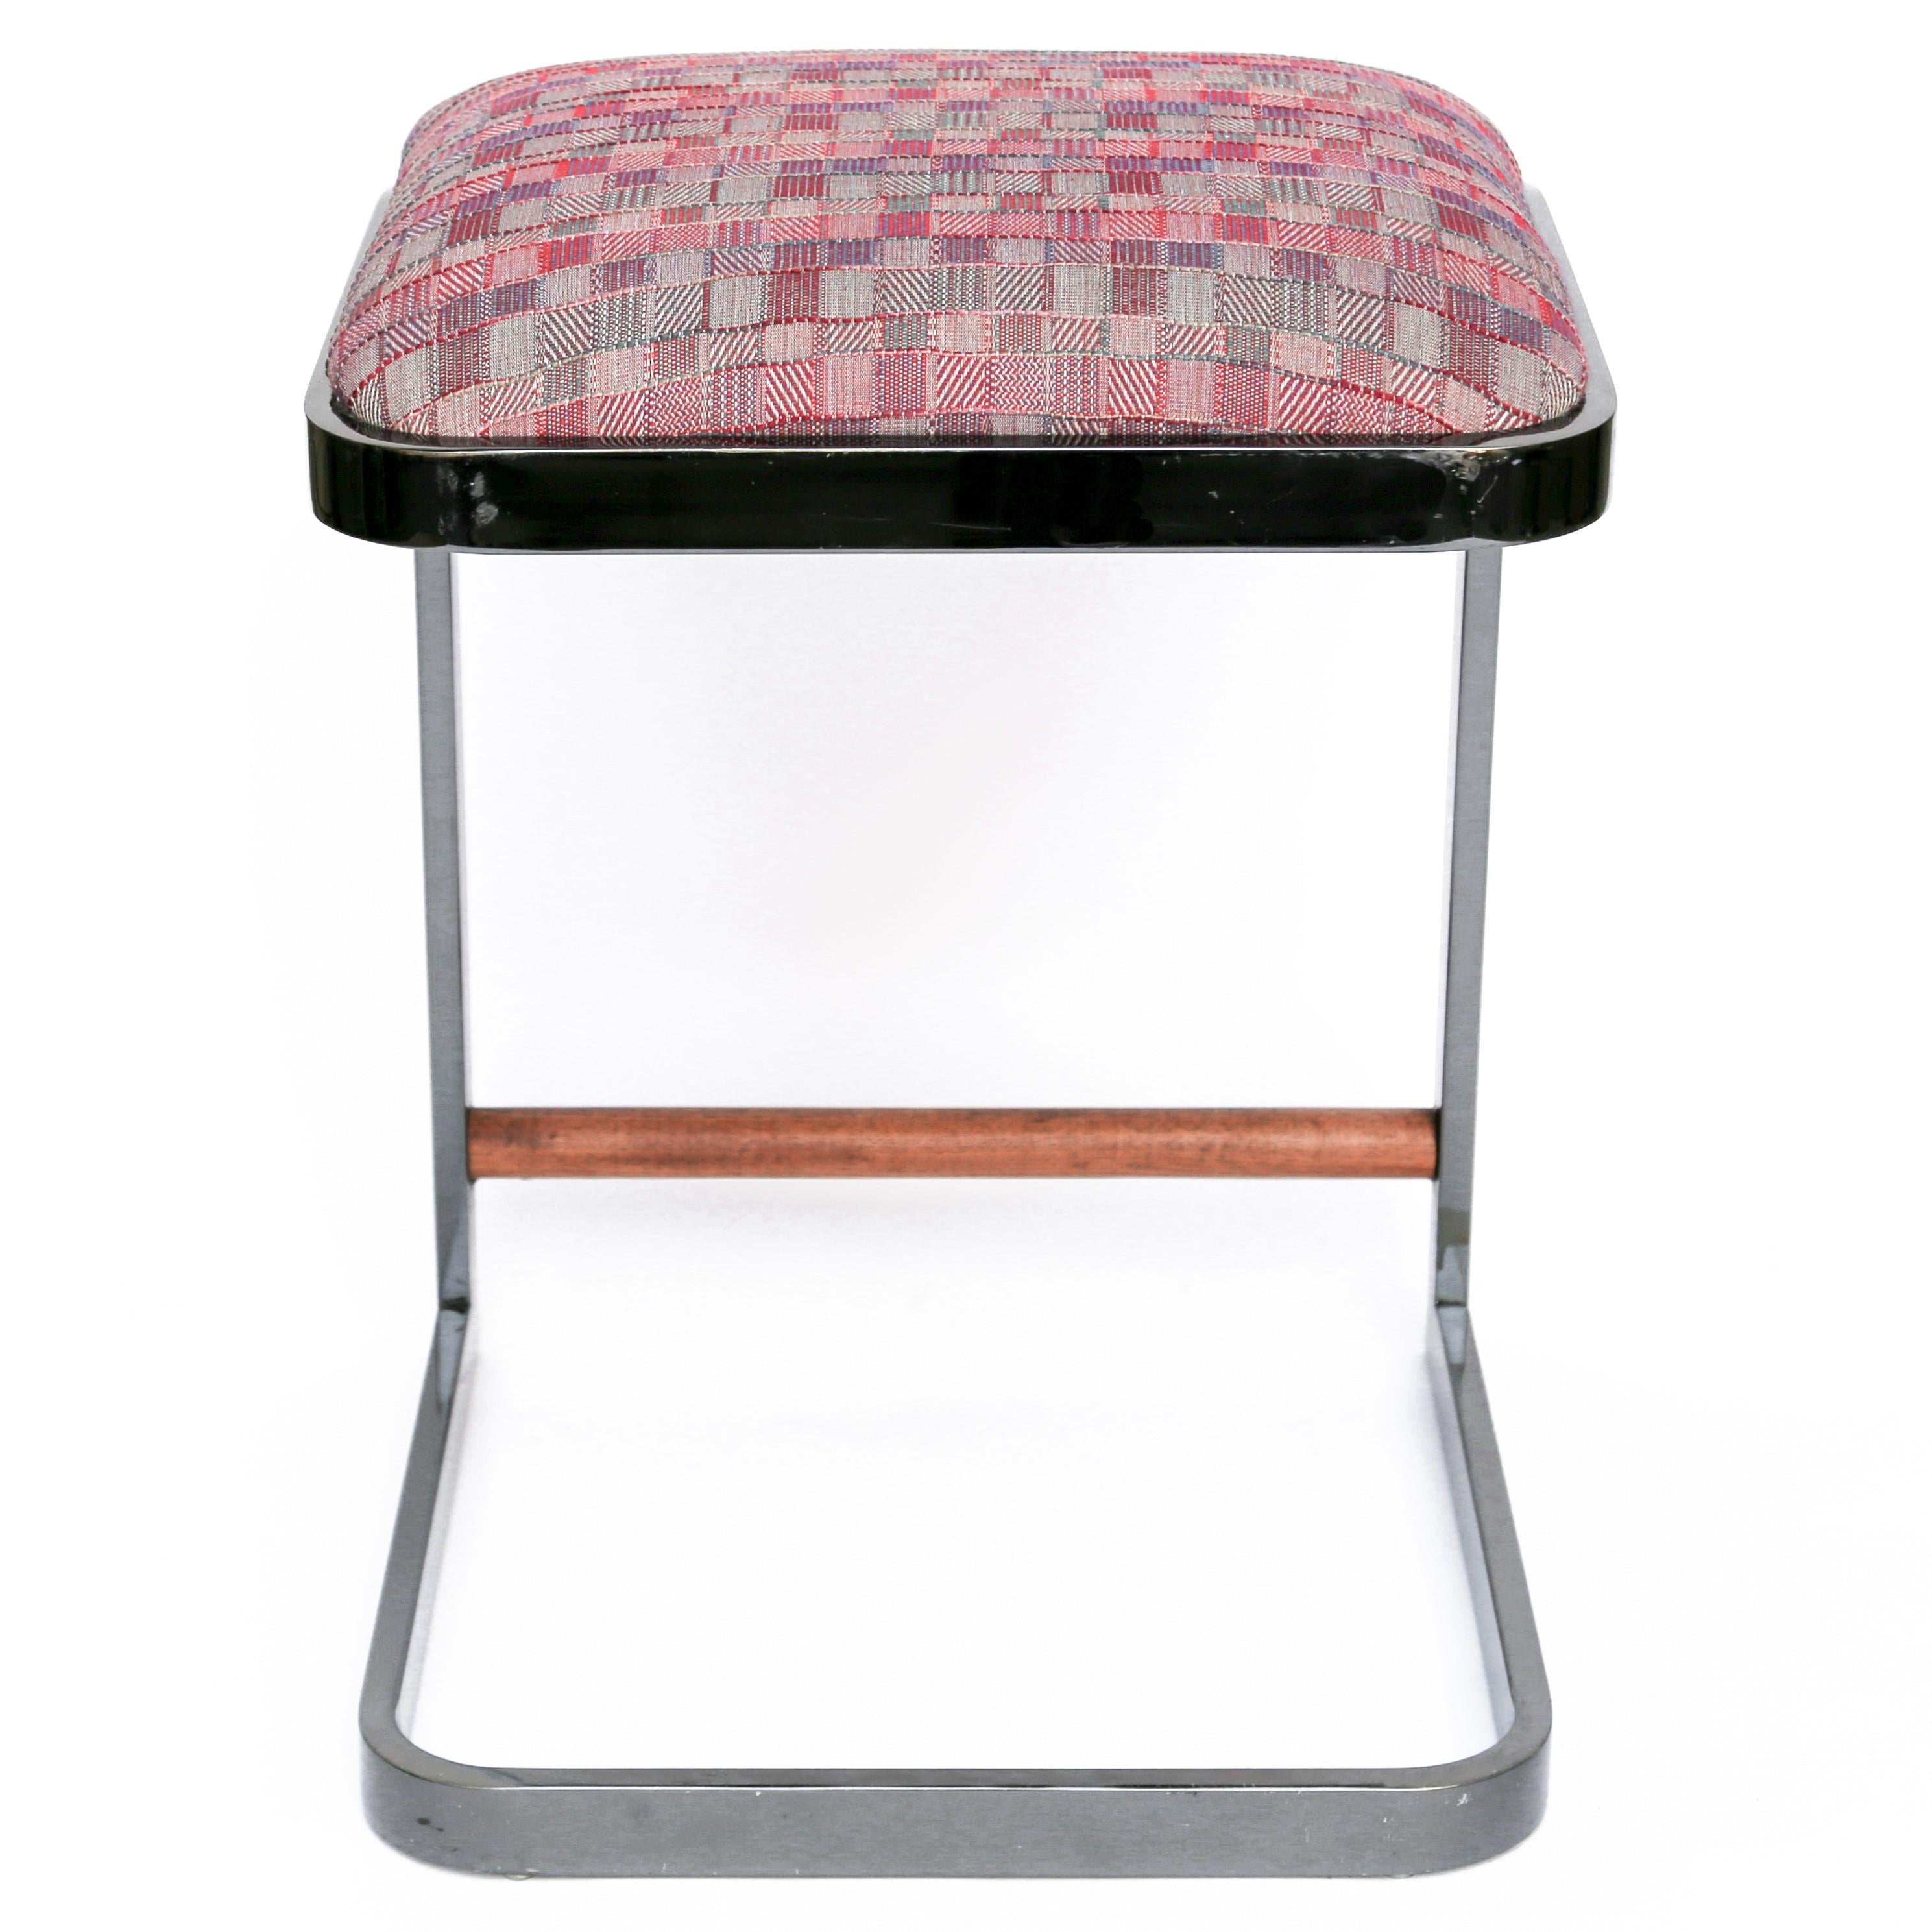 Cantilever Backless Chrome Stool by D I A, Purple Upholstery 4